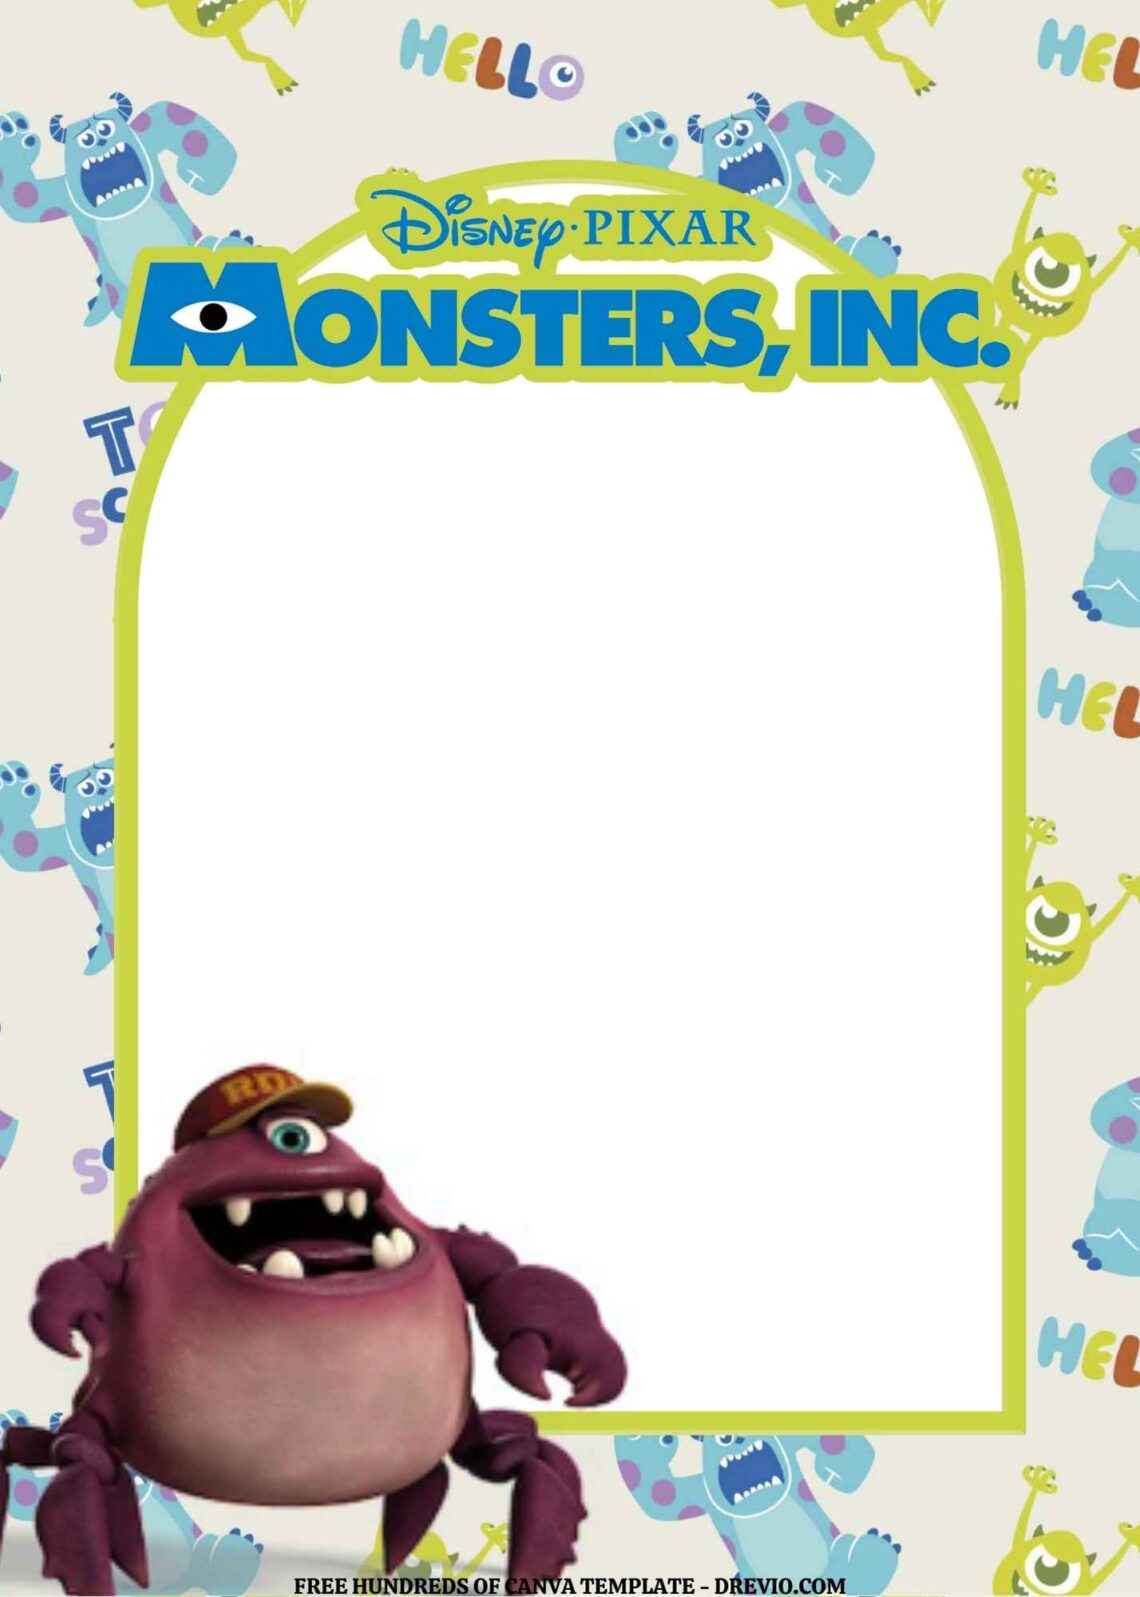 FREE EDITABLE – Monsters, Inc. Canva Templates | Download Hundreds FREE ...